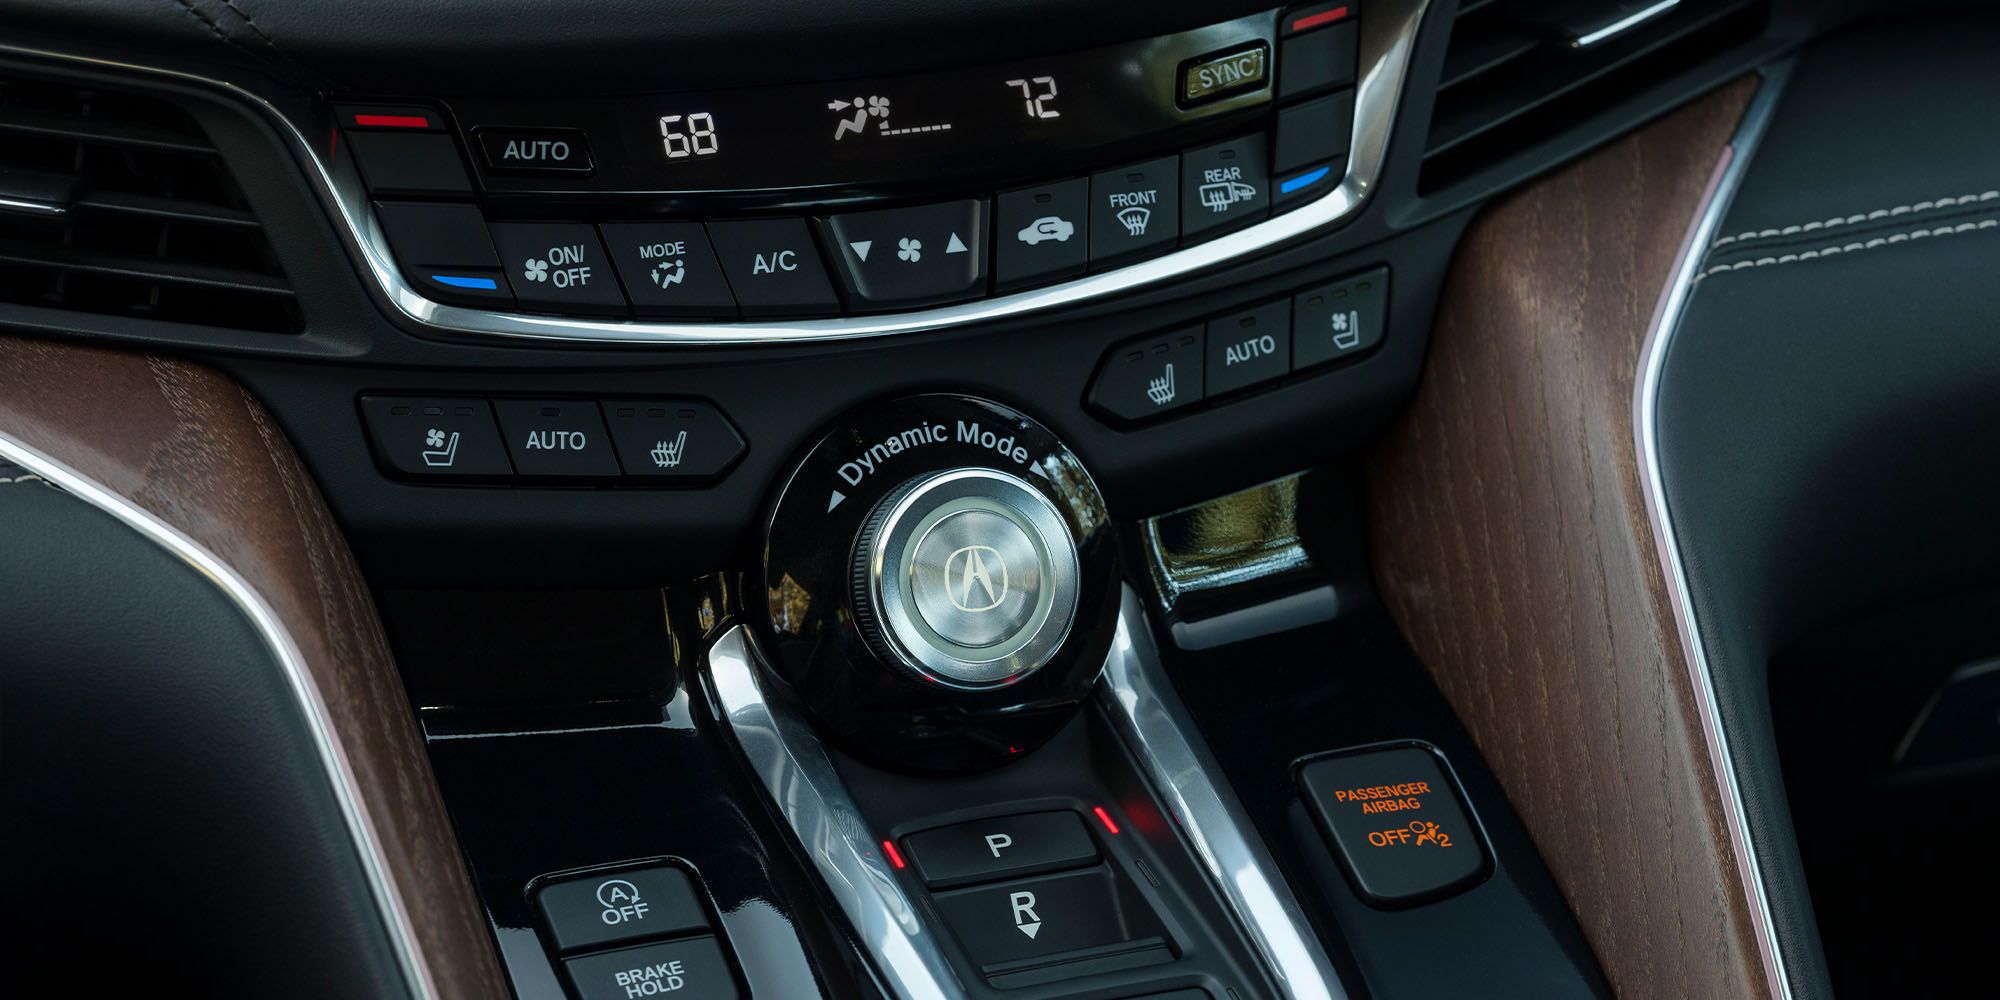 The center control stack in the TLX, showing the drive mode selector